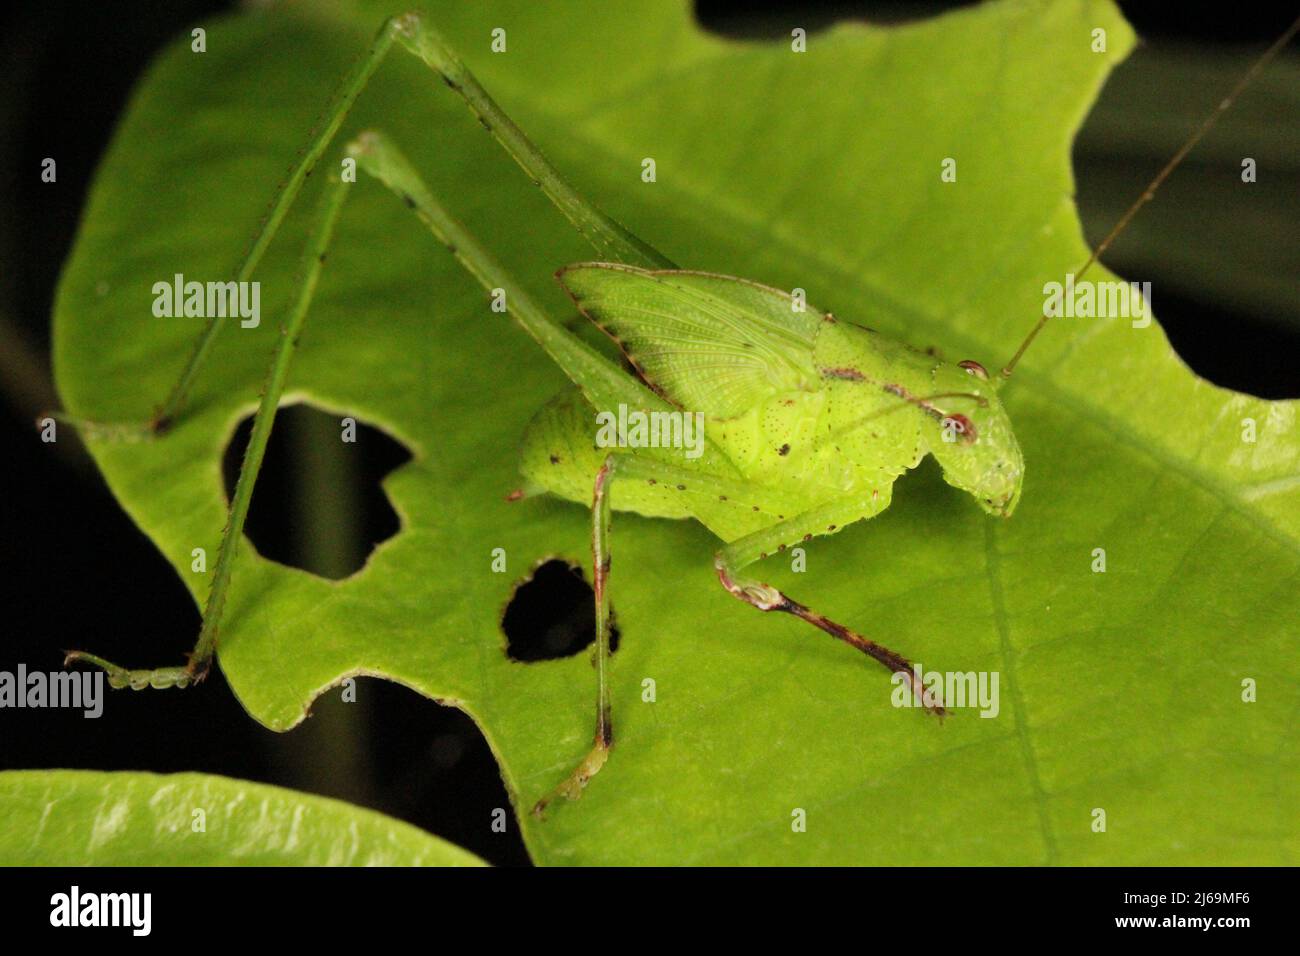 Katydid (family Tettigoniidae) nymph mimicking a green leaf isolated on a natural dark background from the jungles of Belize, Central America Stock Photo